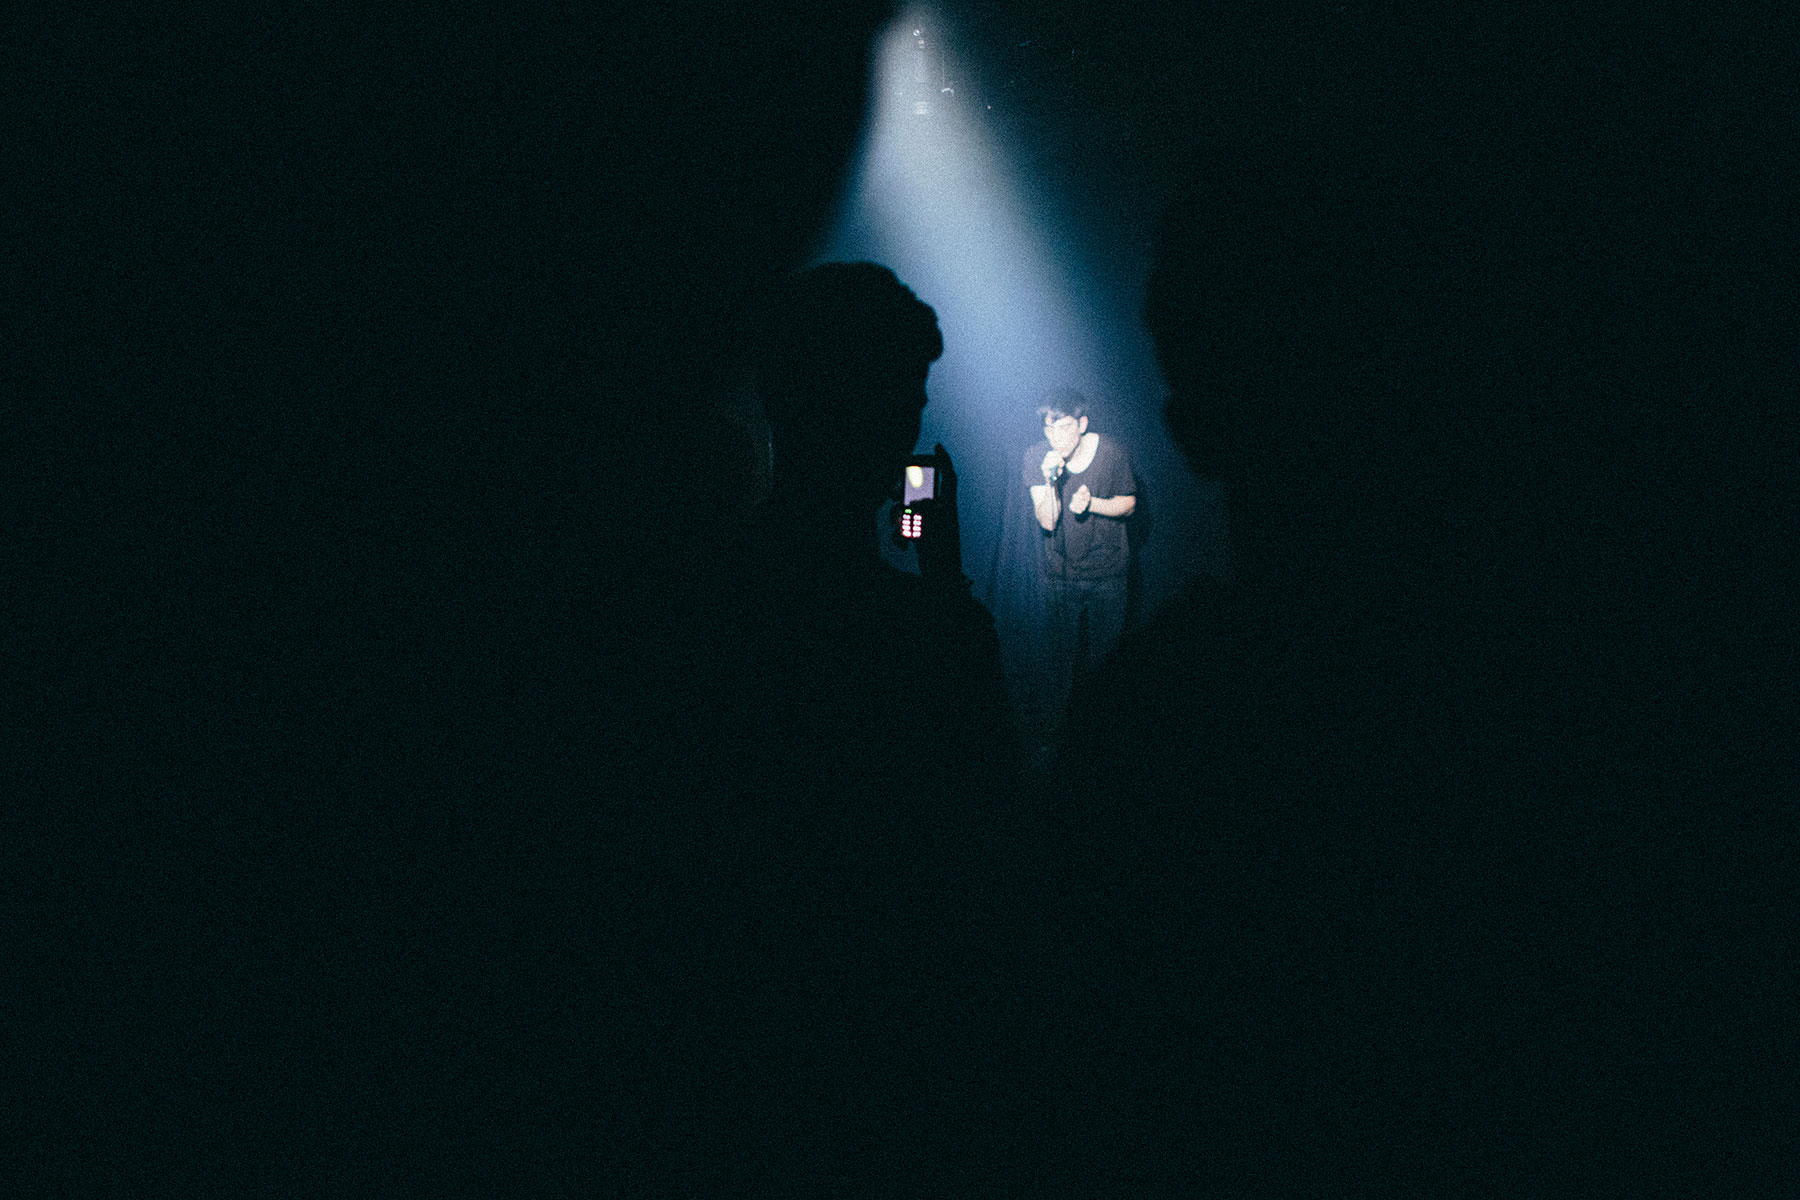 Picture from FROST festival 2013. Rangleklods playing a show in complete darkness, Rangleklods in the dark. At Caféteatret.